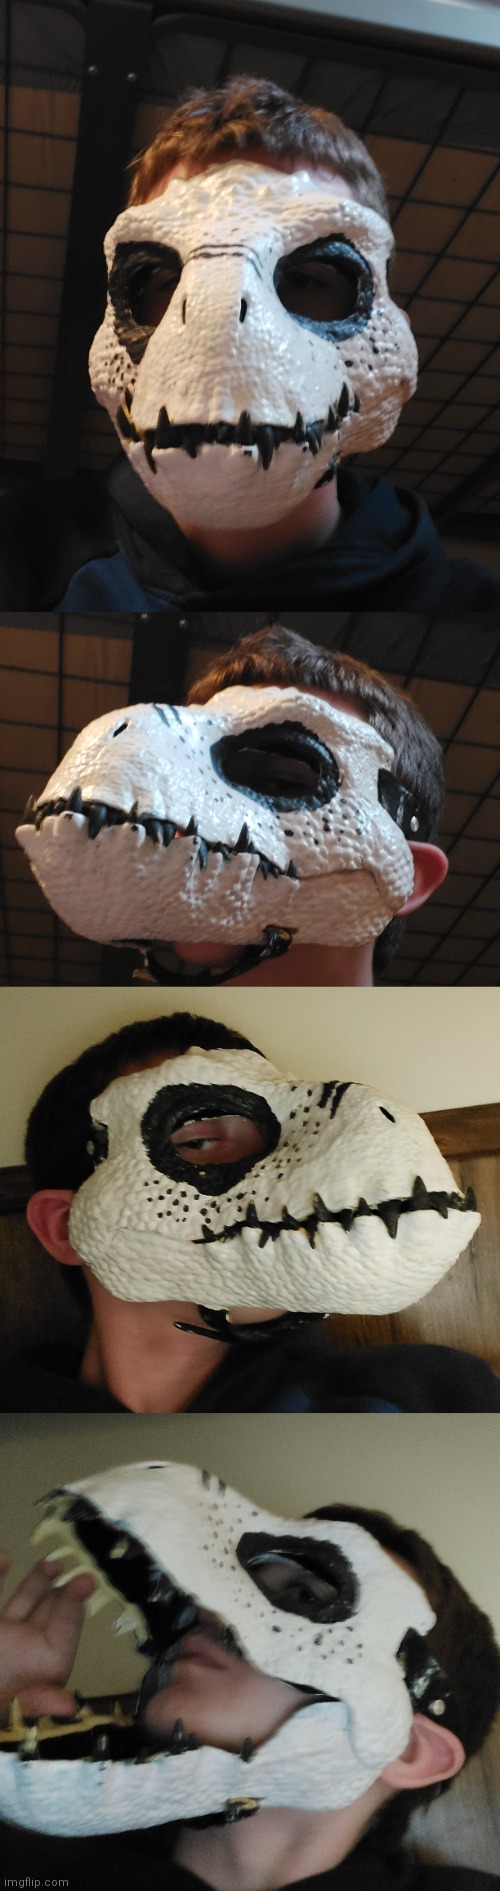 Me wearing my new dino mask! (Ft. about half my face and messy room) | image tagged in dino mask | made w/ Imgflip meme maker